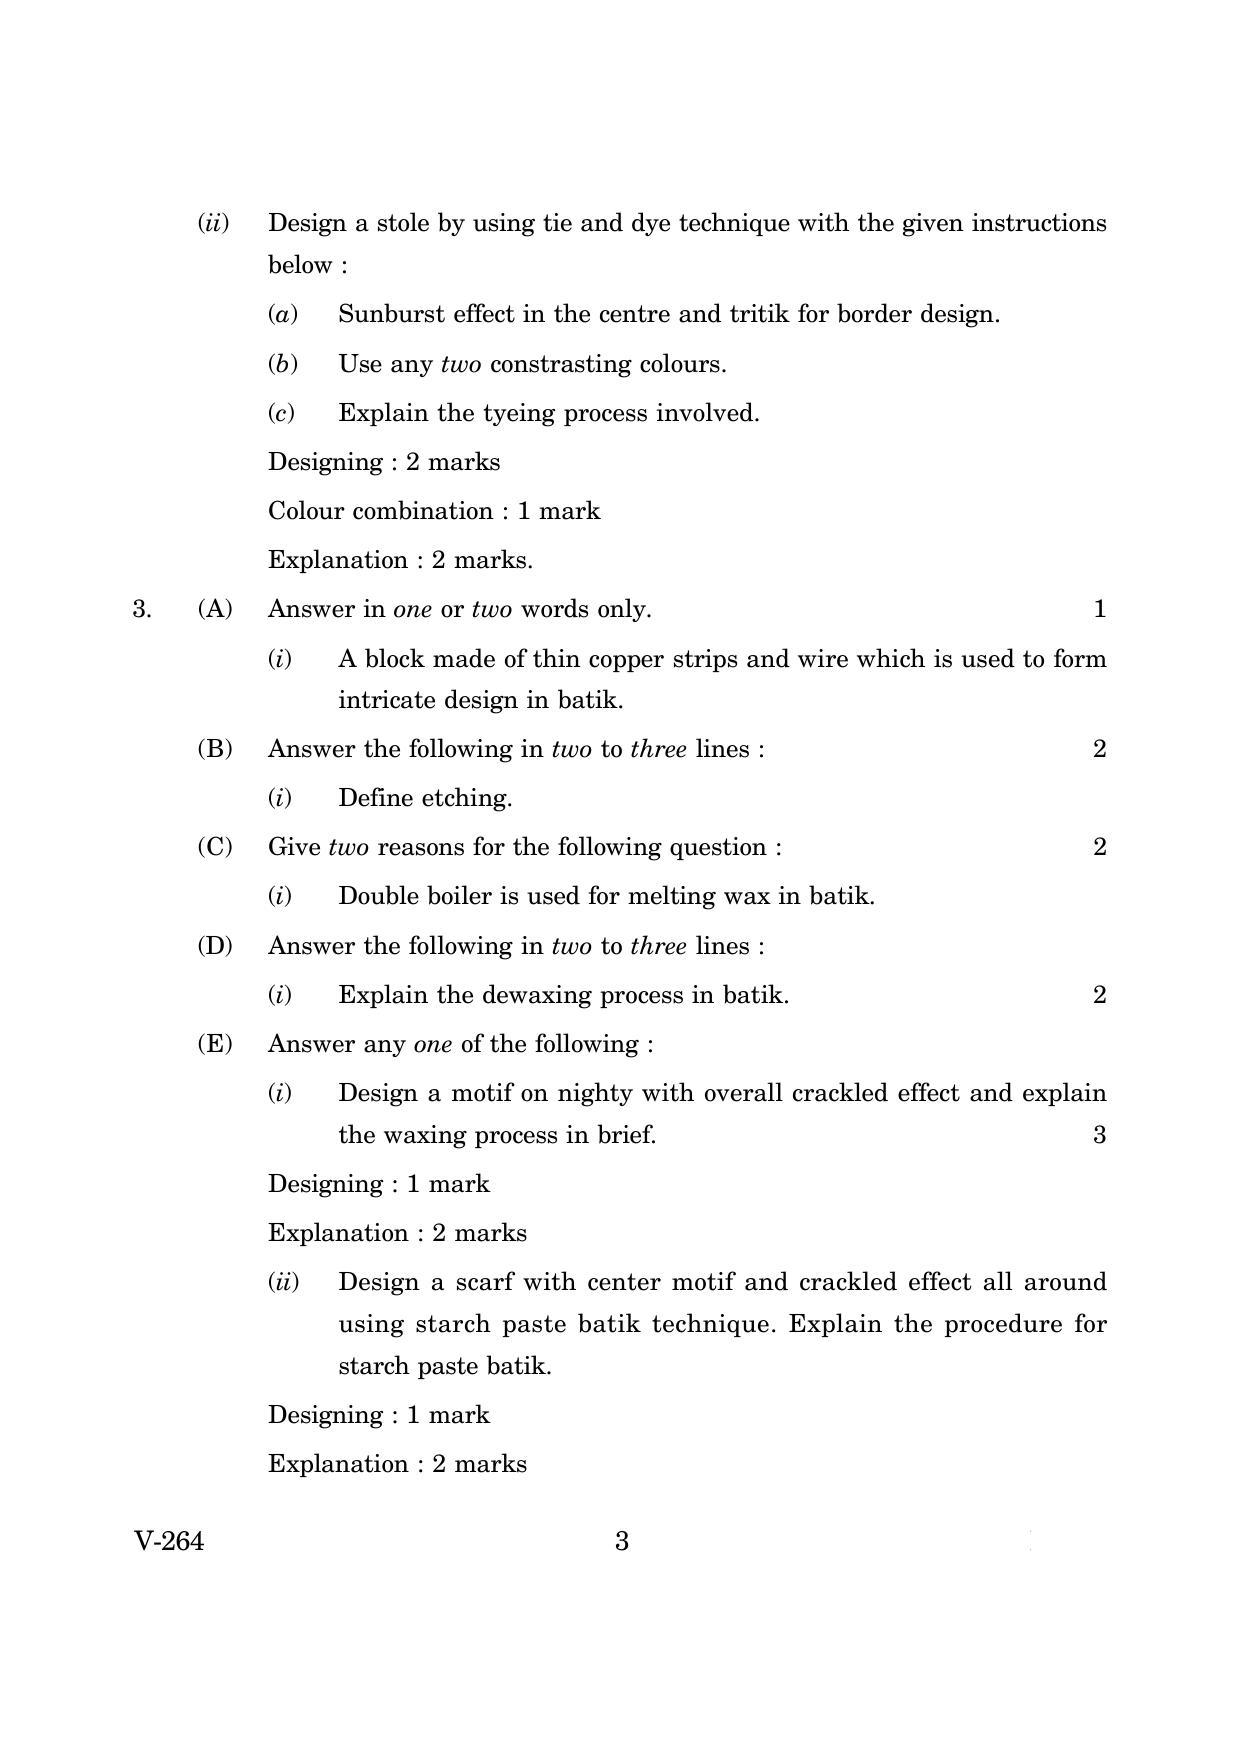 Goa Board Class 12 Dyeing and printing   (March 2019) Question Paper - Page 3